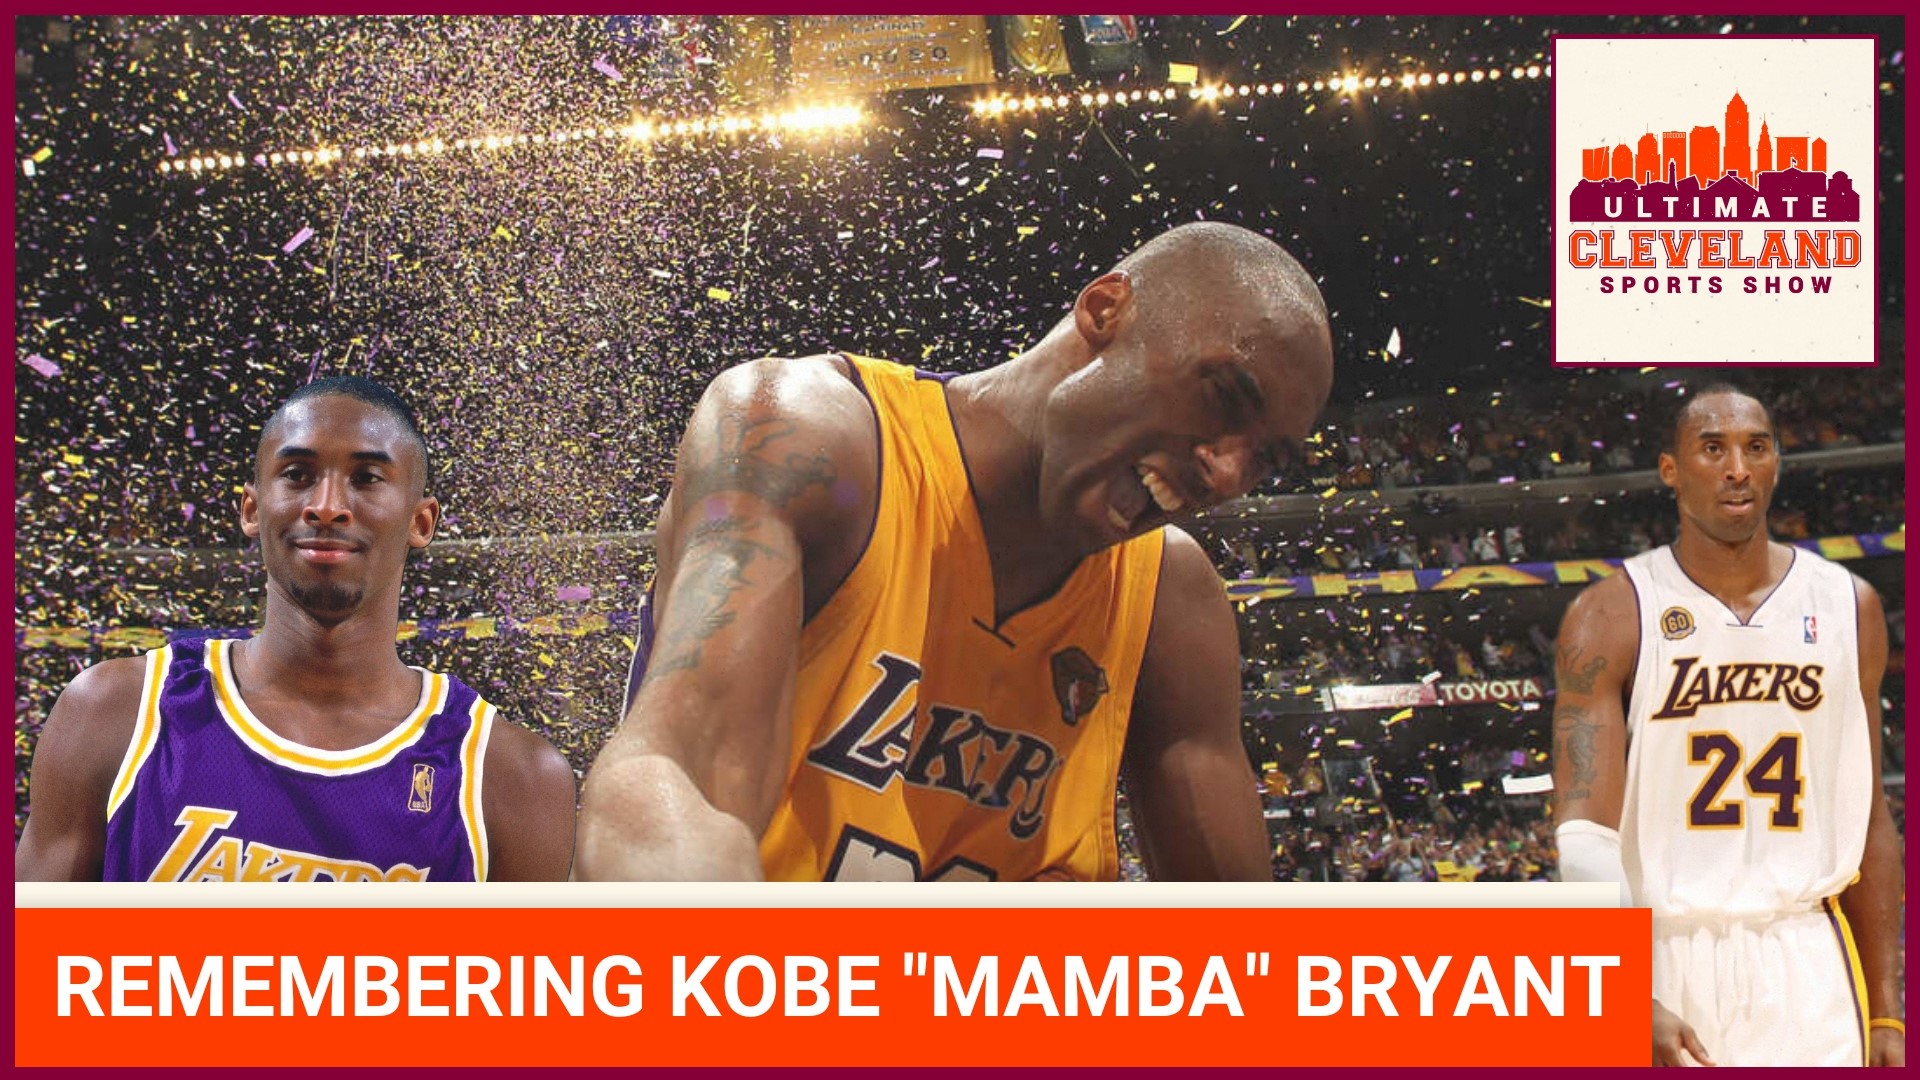 UCSS remembers the amazing life and legacy of Kobe Bryant on the 3rd anniversary of his passing.